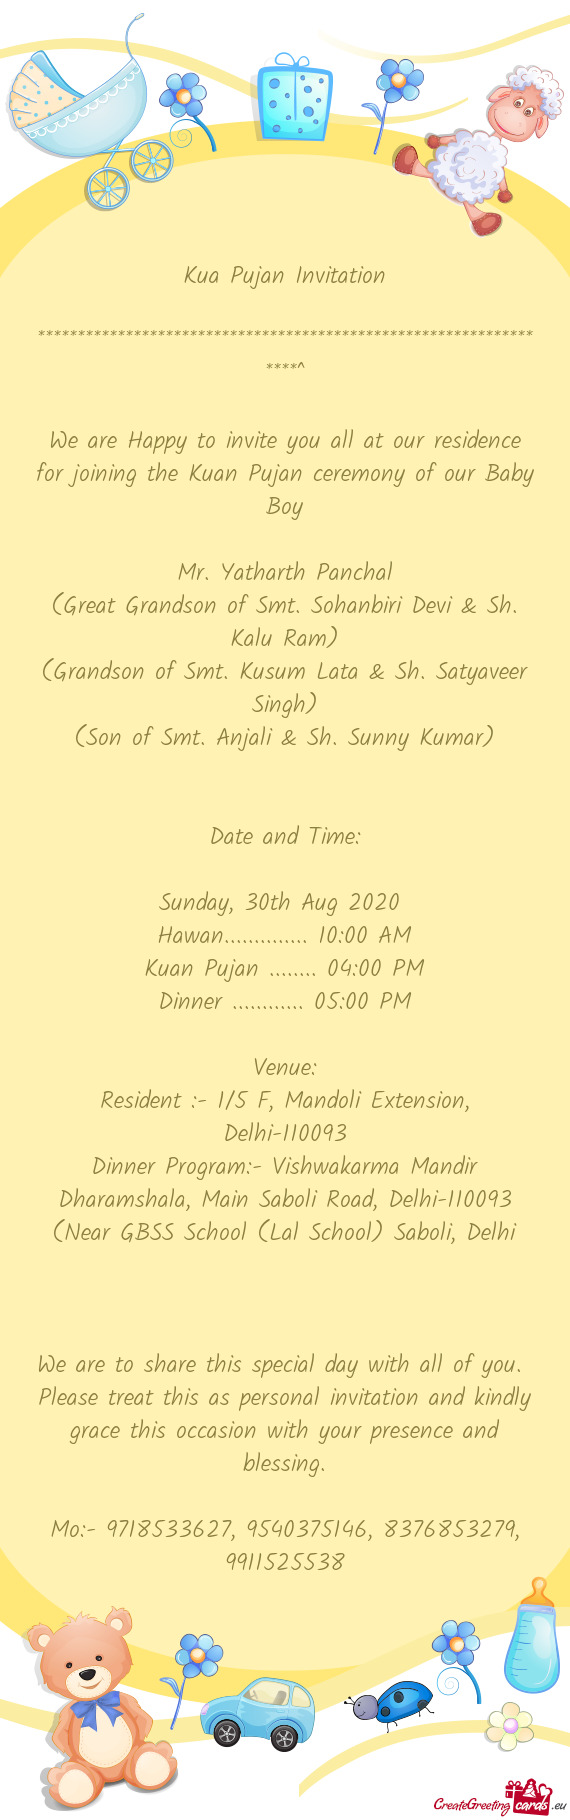 We are Happy to invite you all at our residence for joining the Kuan Pujan ceremony of our Baby Boy